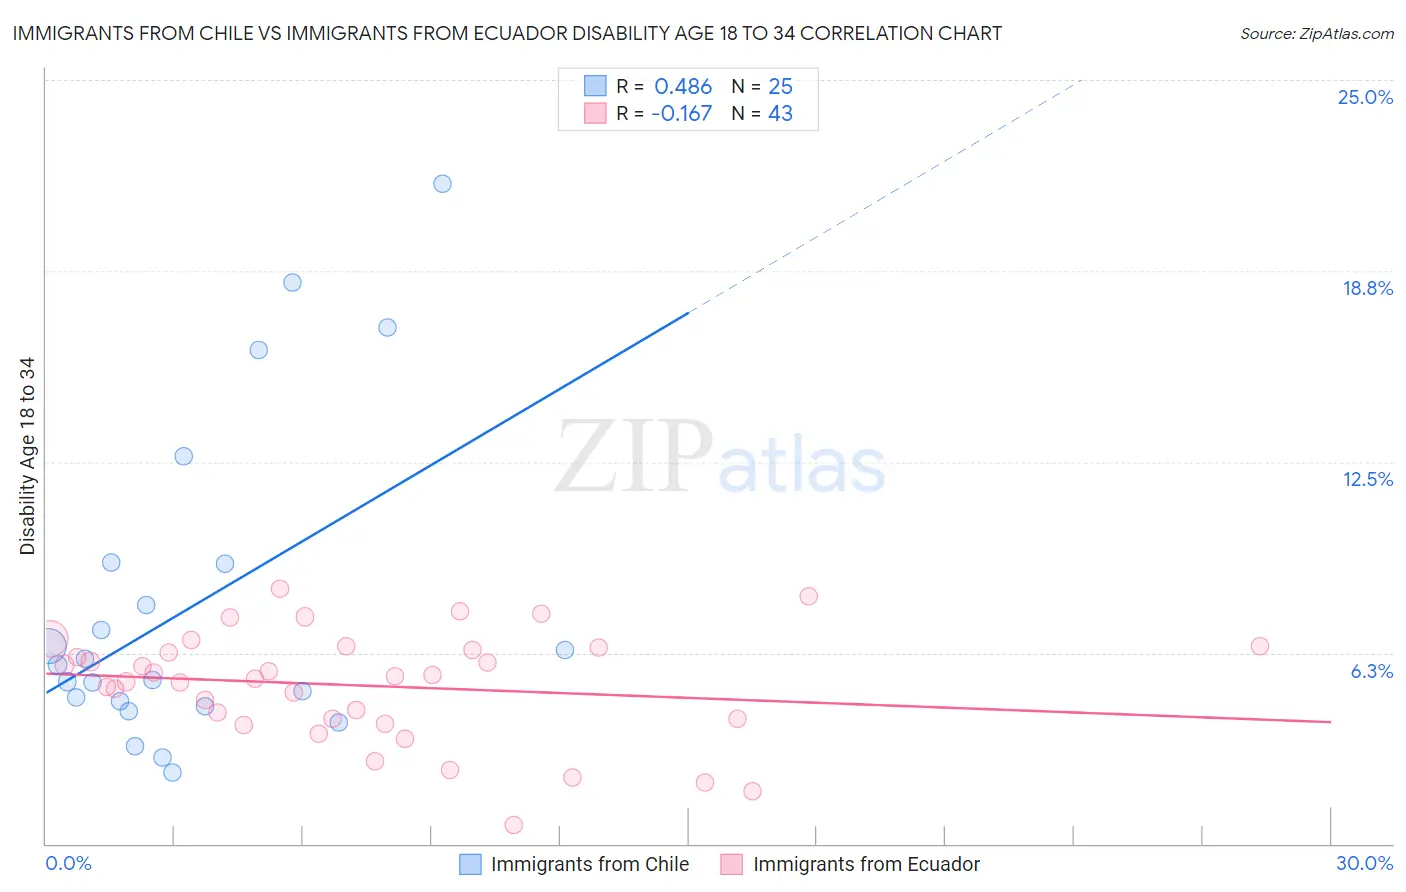 Immigrants from Chile vs Immigrants from Ecuador Disability Age 18 to 34